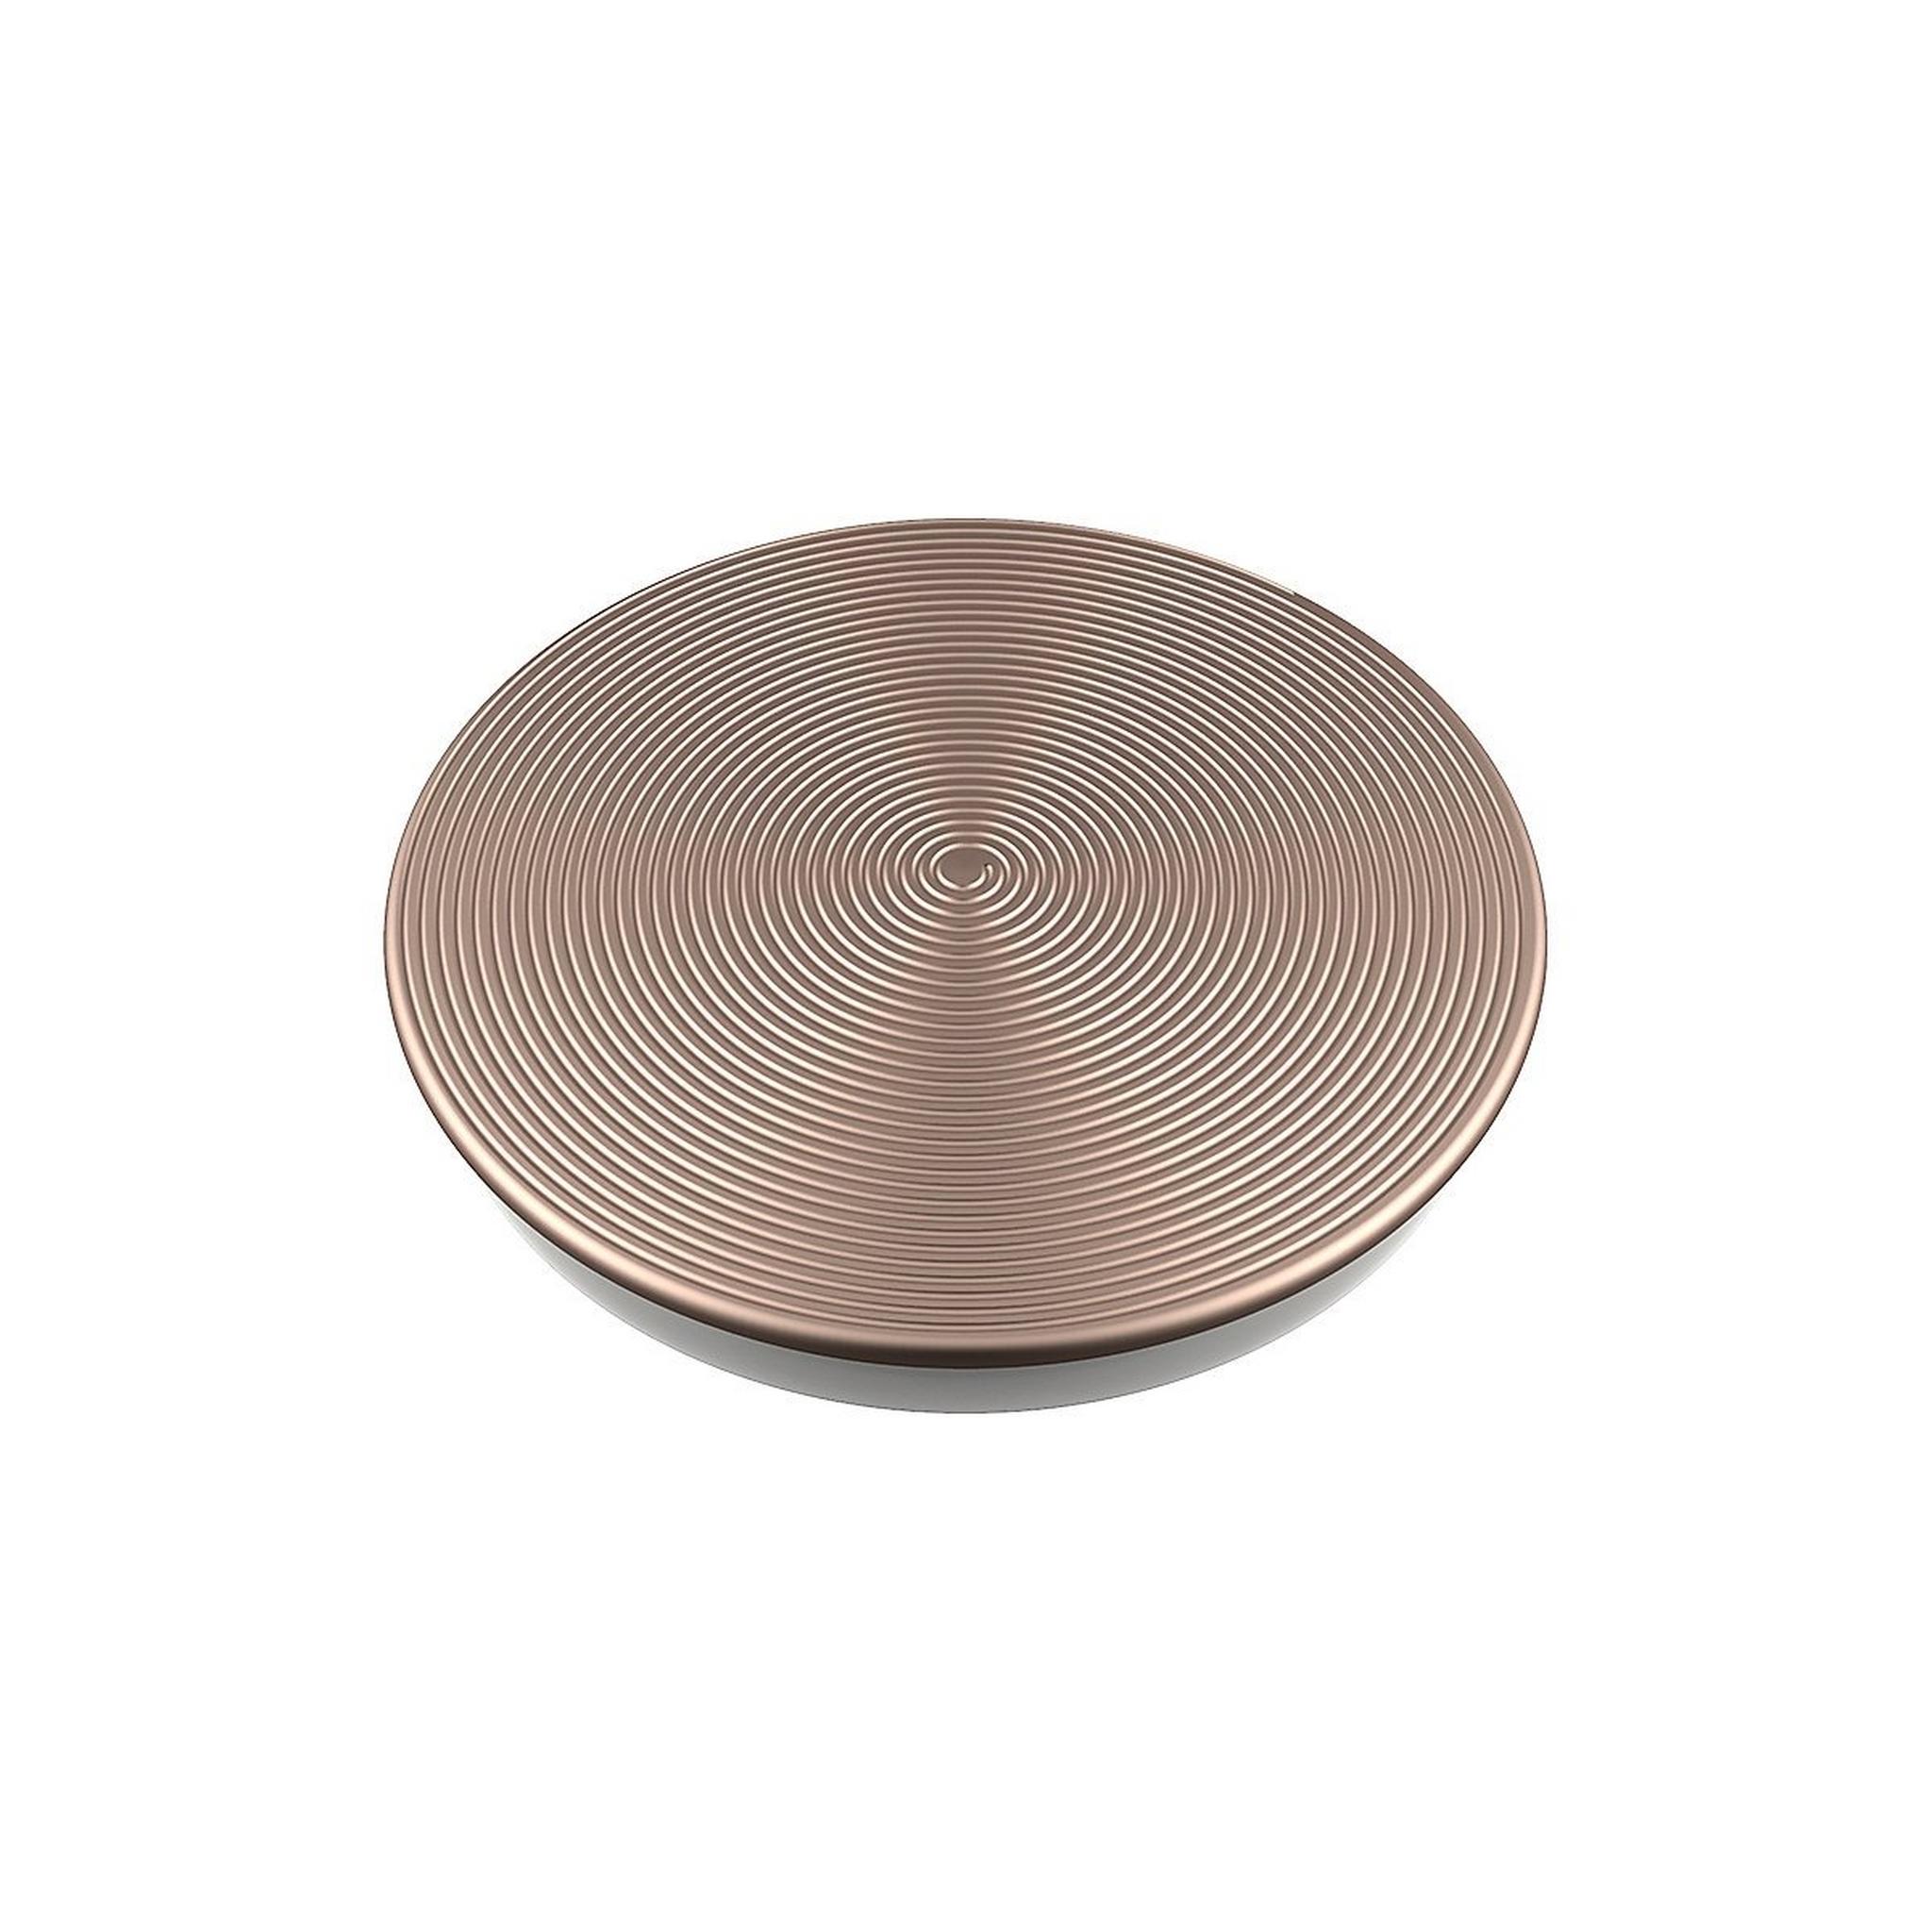 PopSockets Phone Stand and Grip (801137) – Twist Rose Gold Aluminum